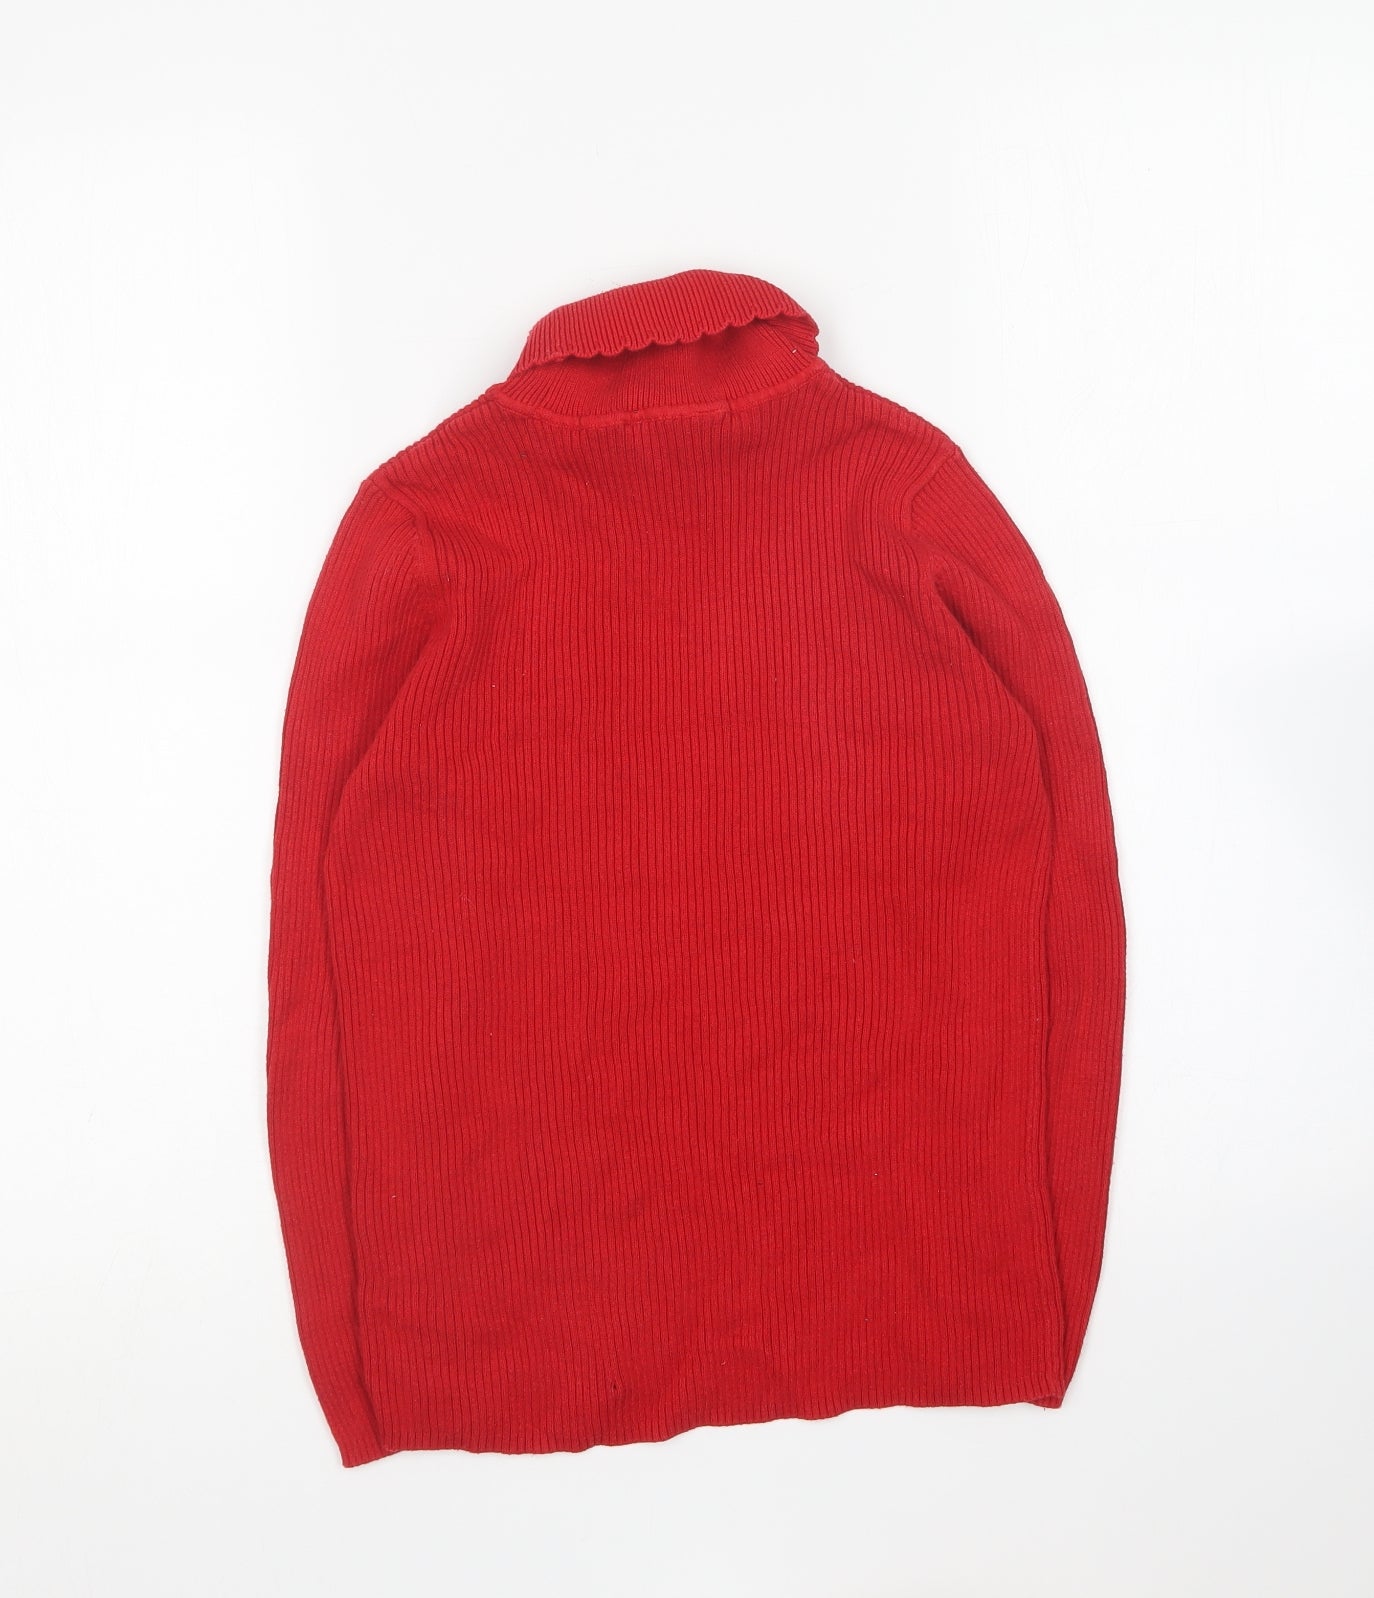 George Girls Red Roll Neck Cotton Pullover Jumper Size 9-10 Years